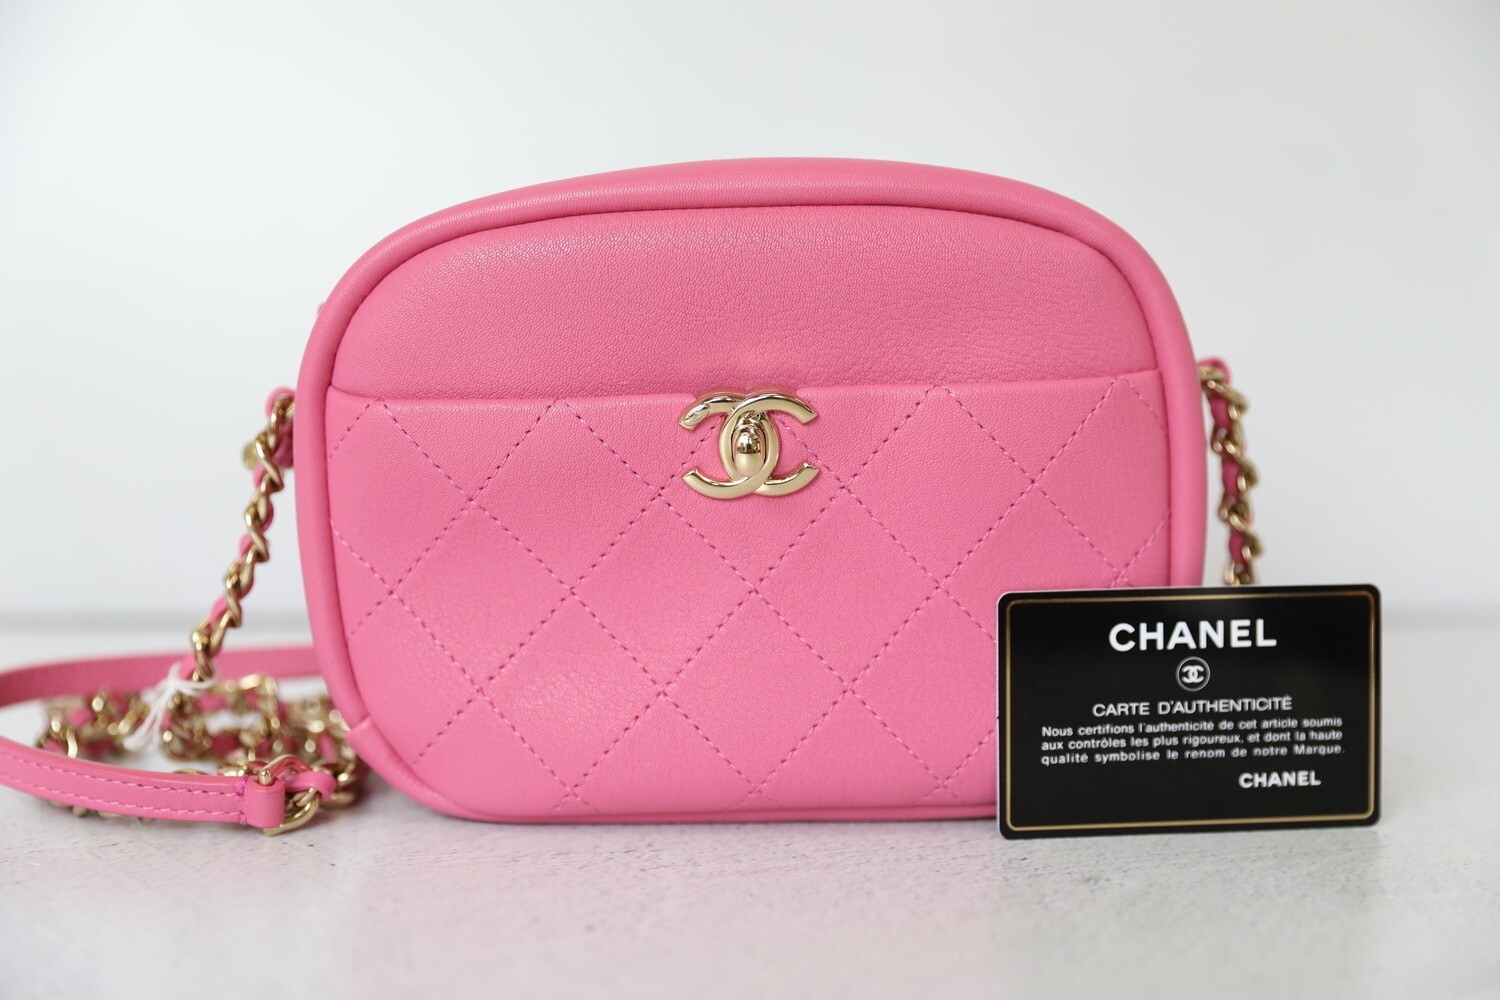 Chanel Casual Trip Camera Bag, Pink Calfskin with Gold Hardware, Preowned  in Box WA001